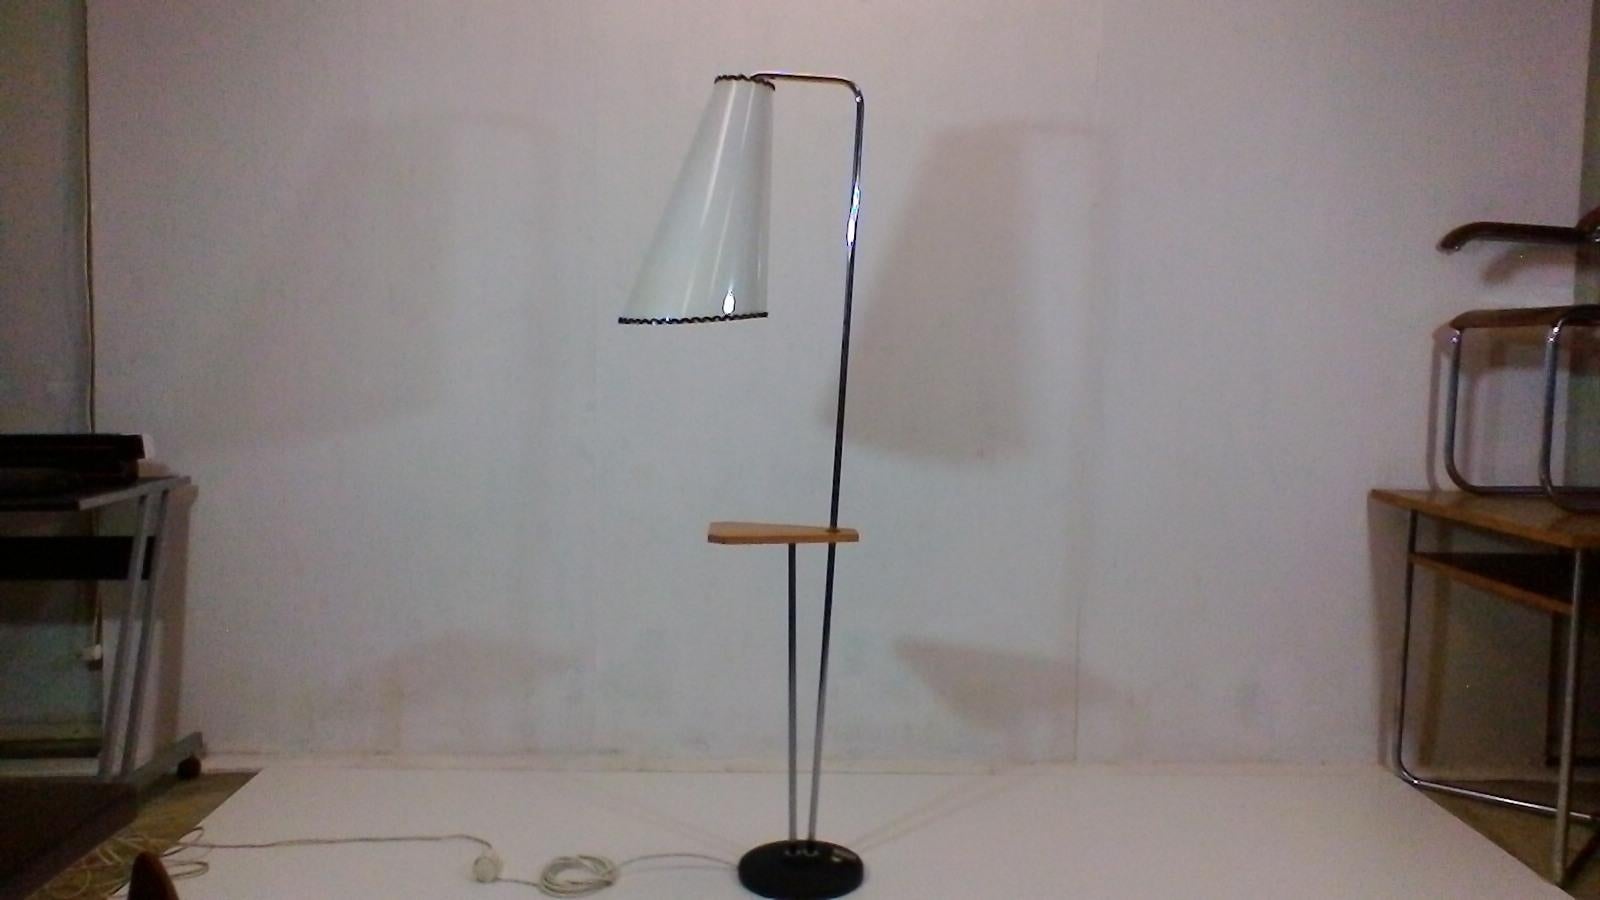 The item is made in Društvo Lidokov in Czechoslovakia. The lamp is made for metal chromed frame, metal painted base, wooden painted side table and mica shade. Functional status and good condition.